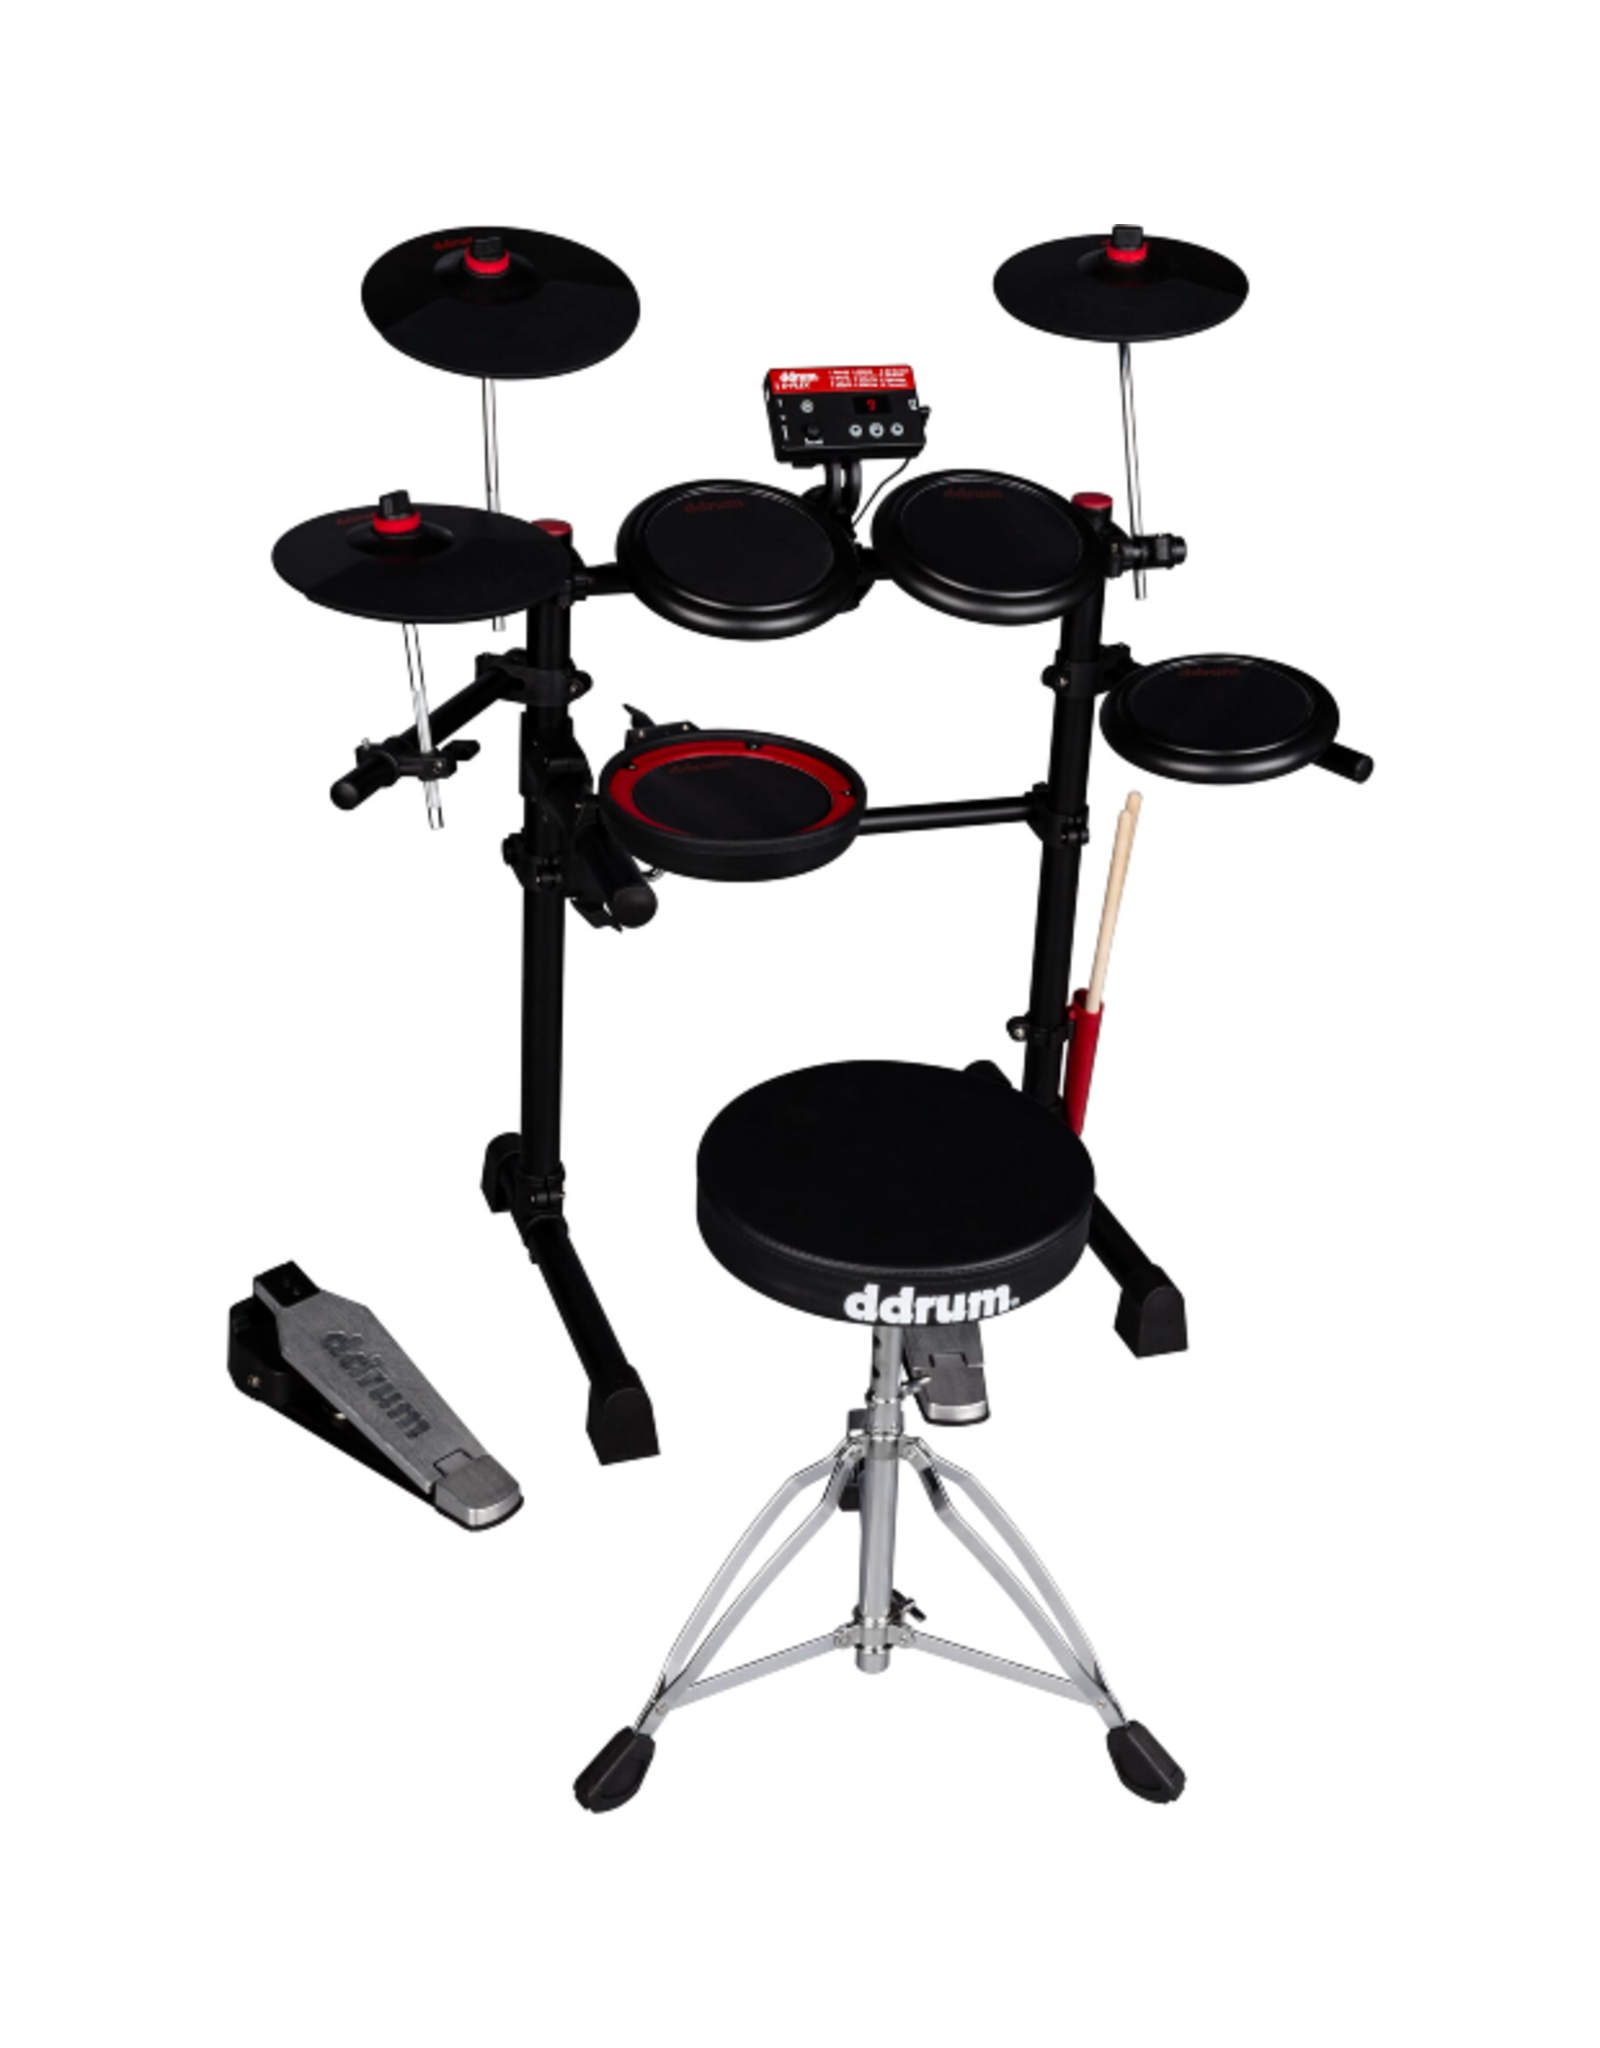 ddrum ddrum E-Flex Complete Electronic Set with Mesh Drum Heads